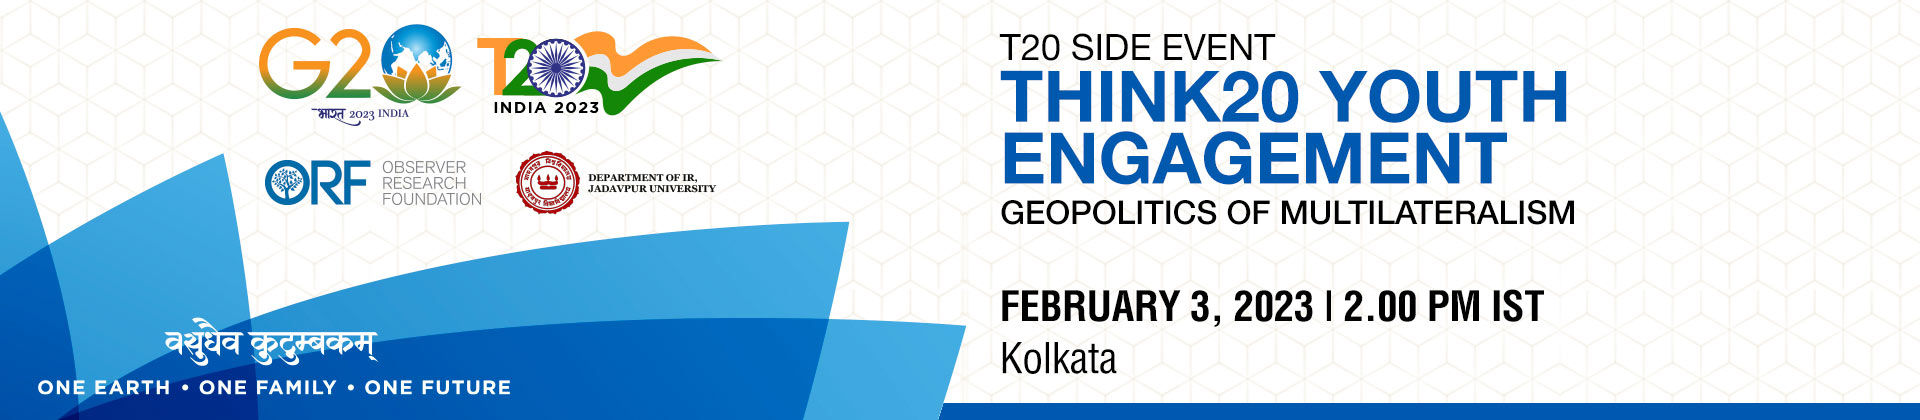 T20 Side Event | Think20 Youth Engagement: Geopolitics of Multilateralism